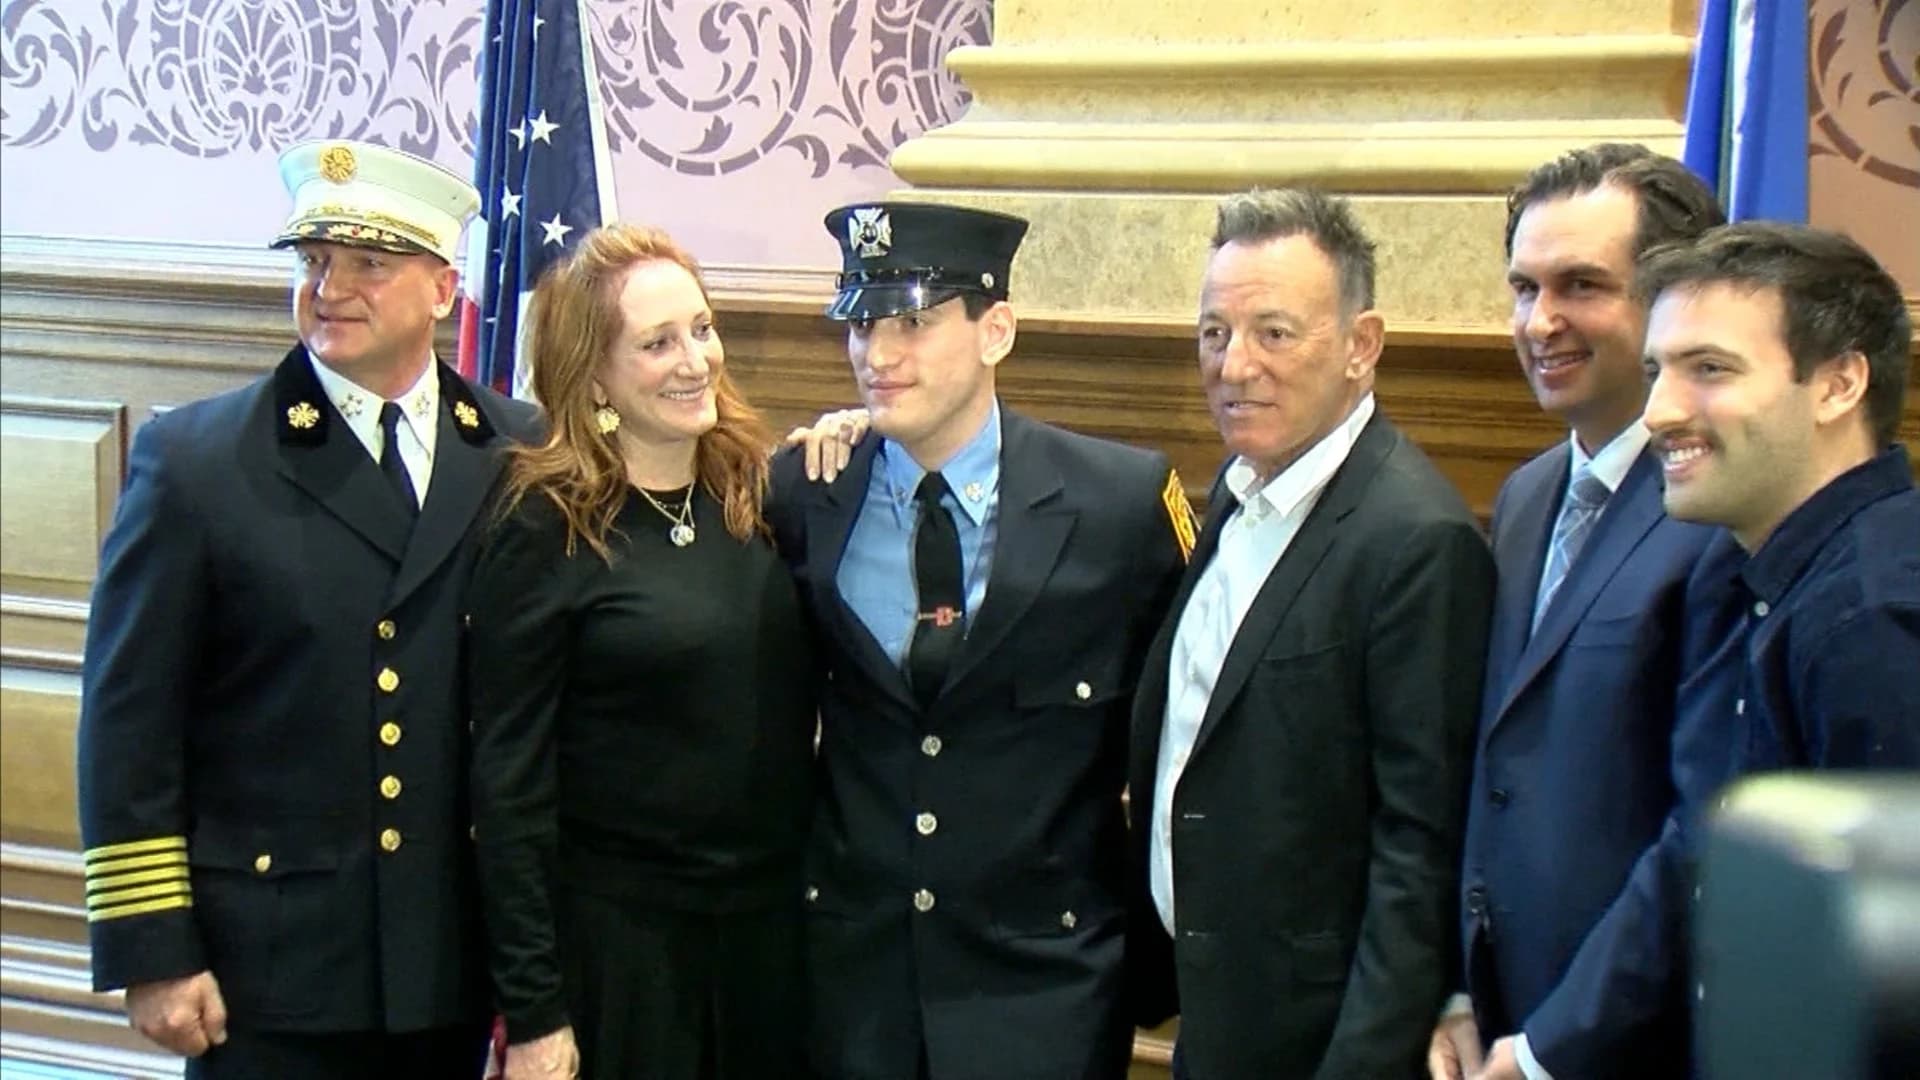 Jersey City swears in 16 new firefighters – among them, Springsteen’s son